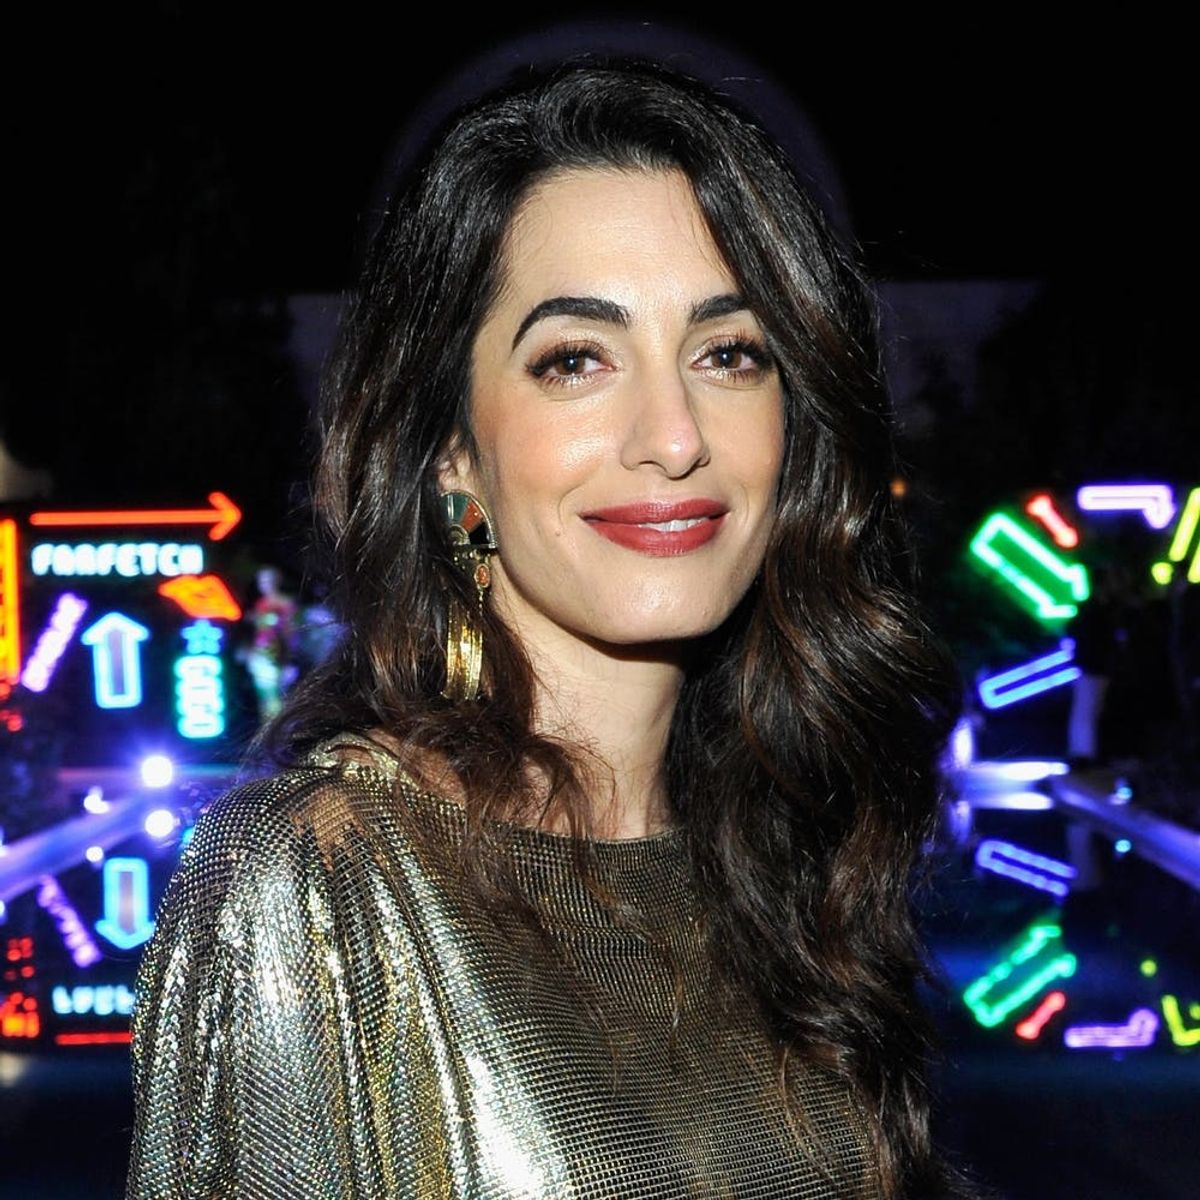 Amal Clooney Just Won #ThrowbackThursday With This Newly Resurfaced Yearbook Photo